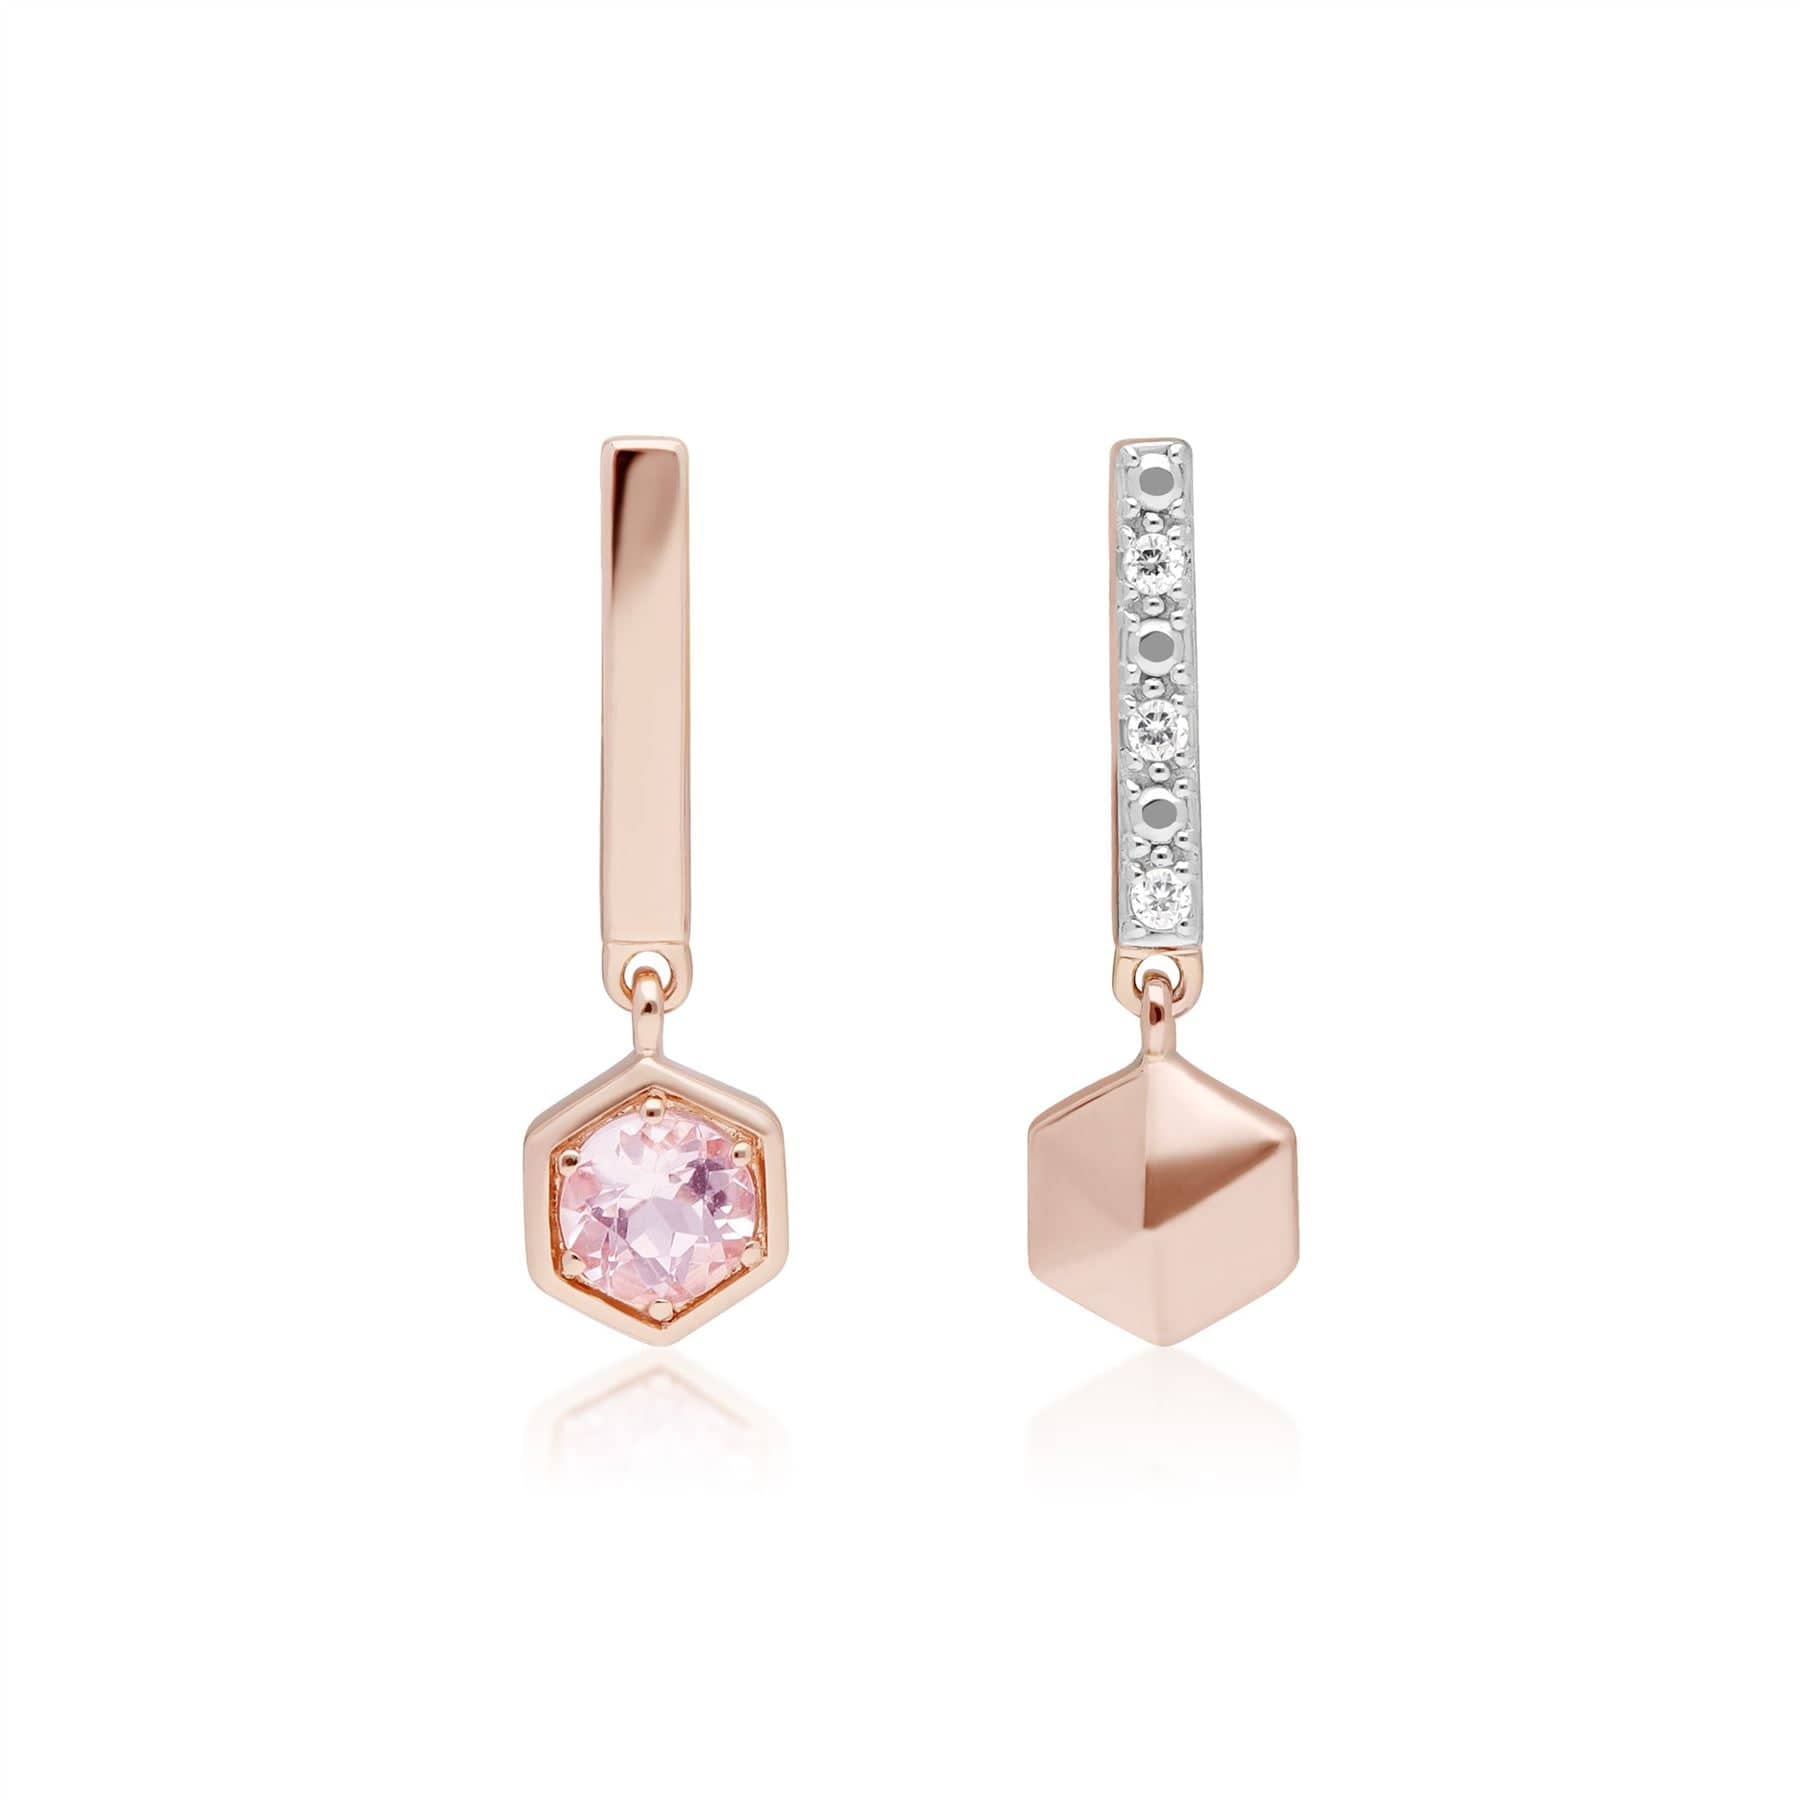 Image of Micro Statement Mismatched Morganite & Diamond Drop Earrings in 9ct Rose Gold